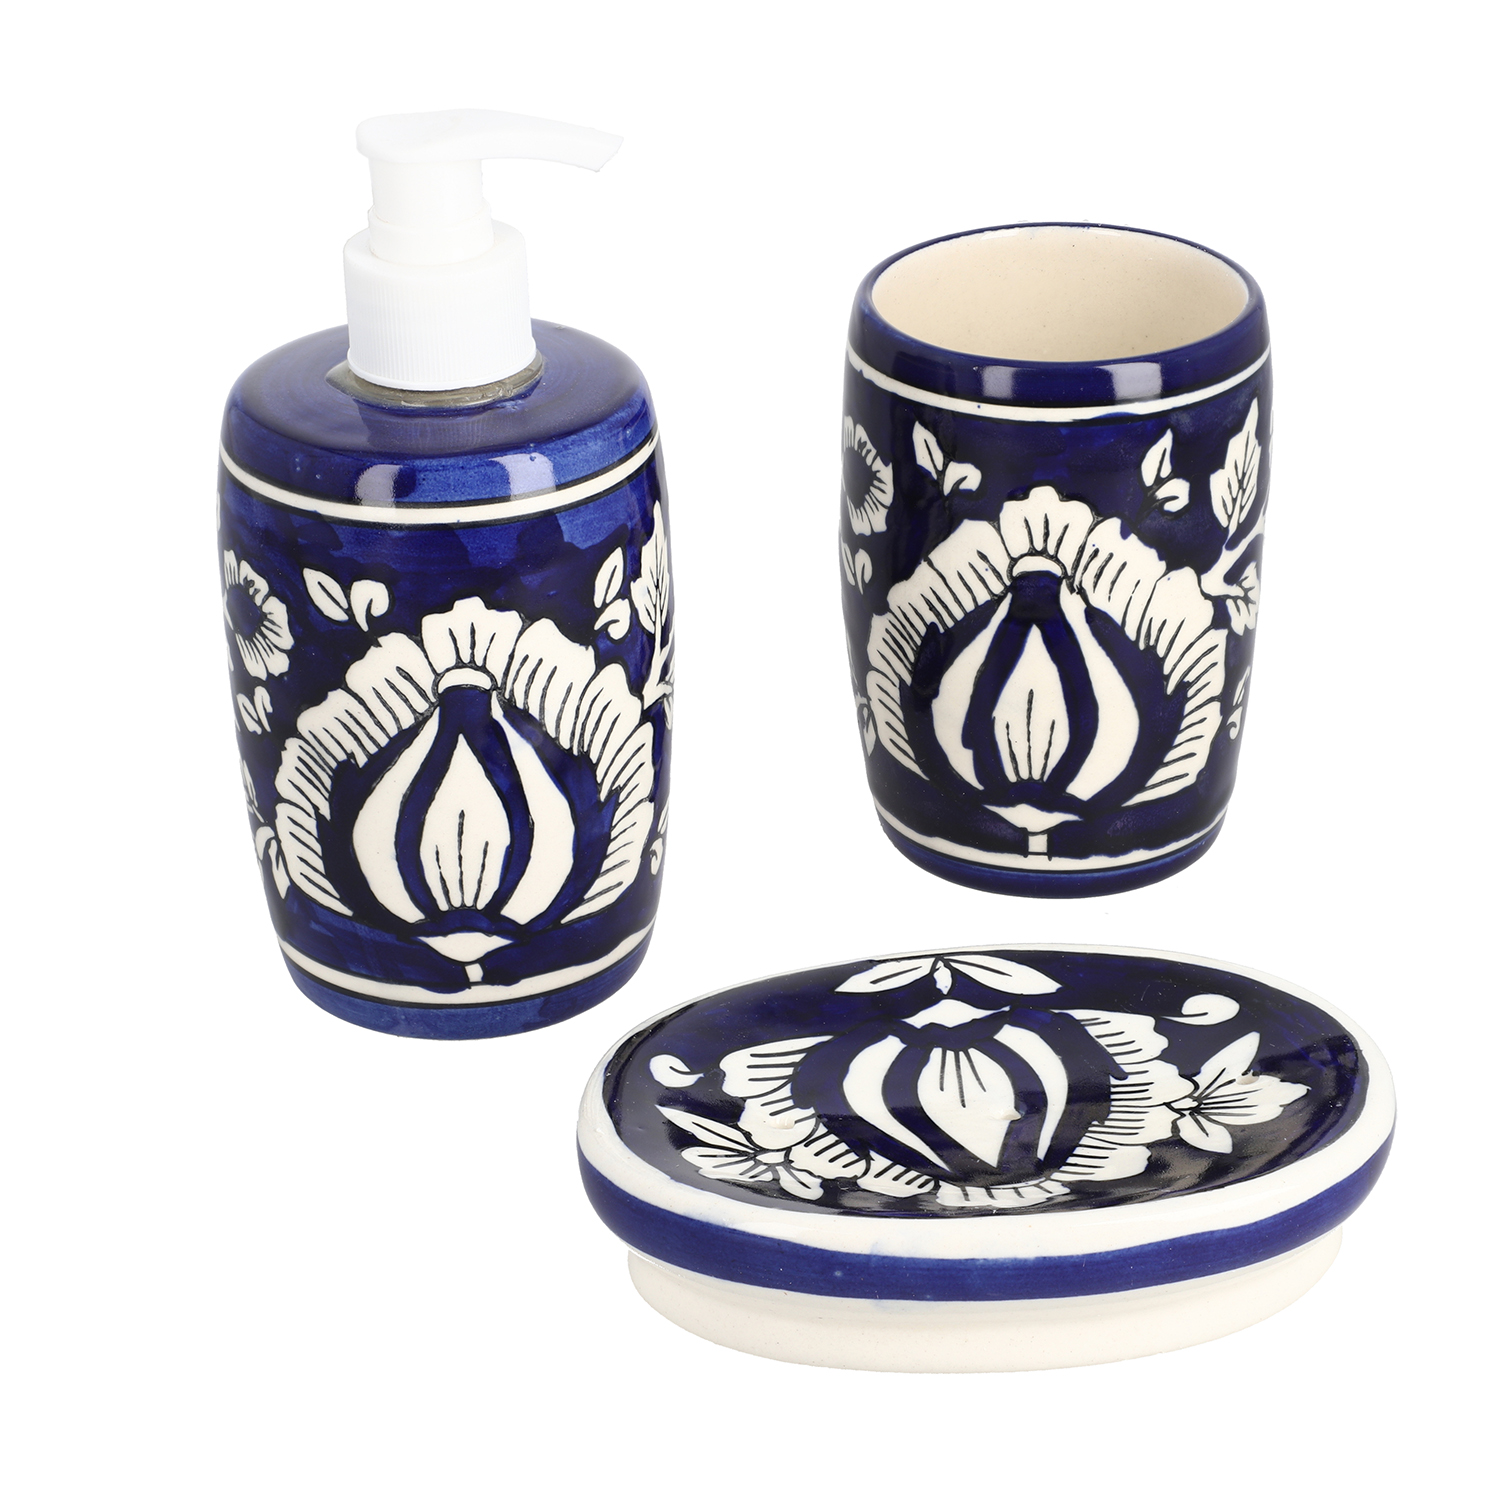 Set of 3 Handcrafted Ceramic Bathroom Accessory Liquid Soap Dispenser, Soap Tray & Tumbler - Navy and White